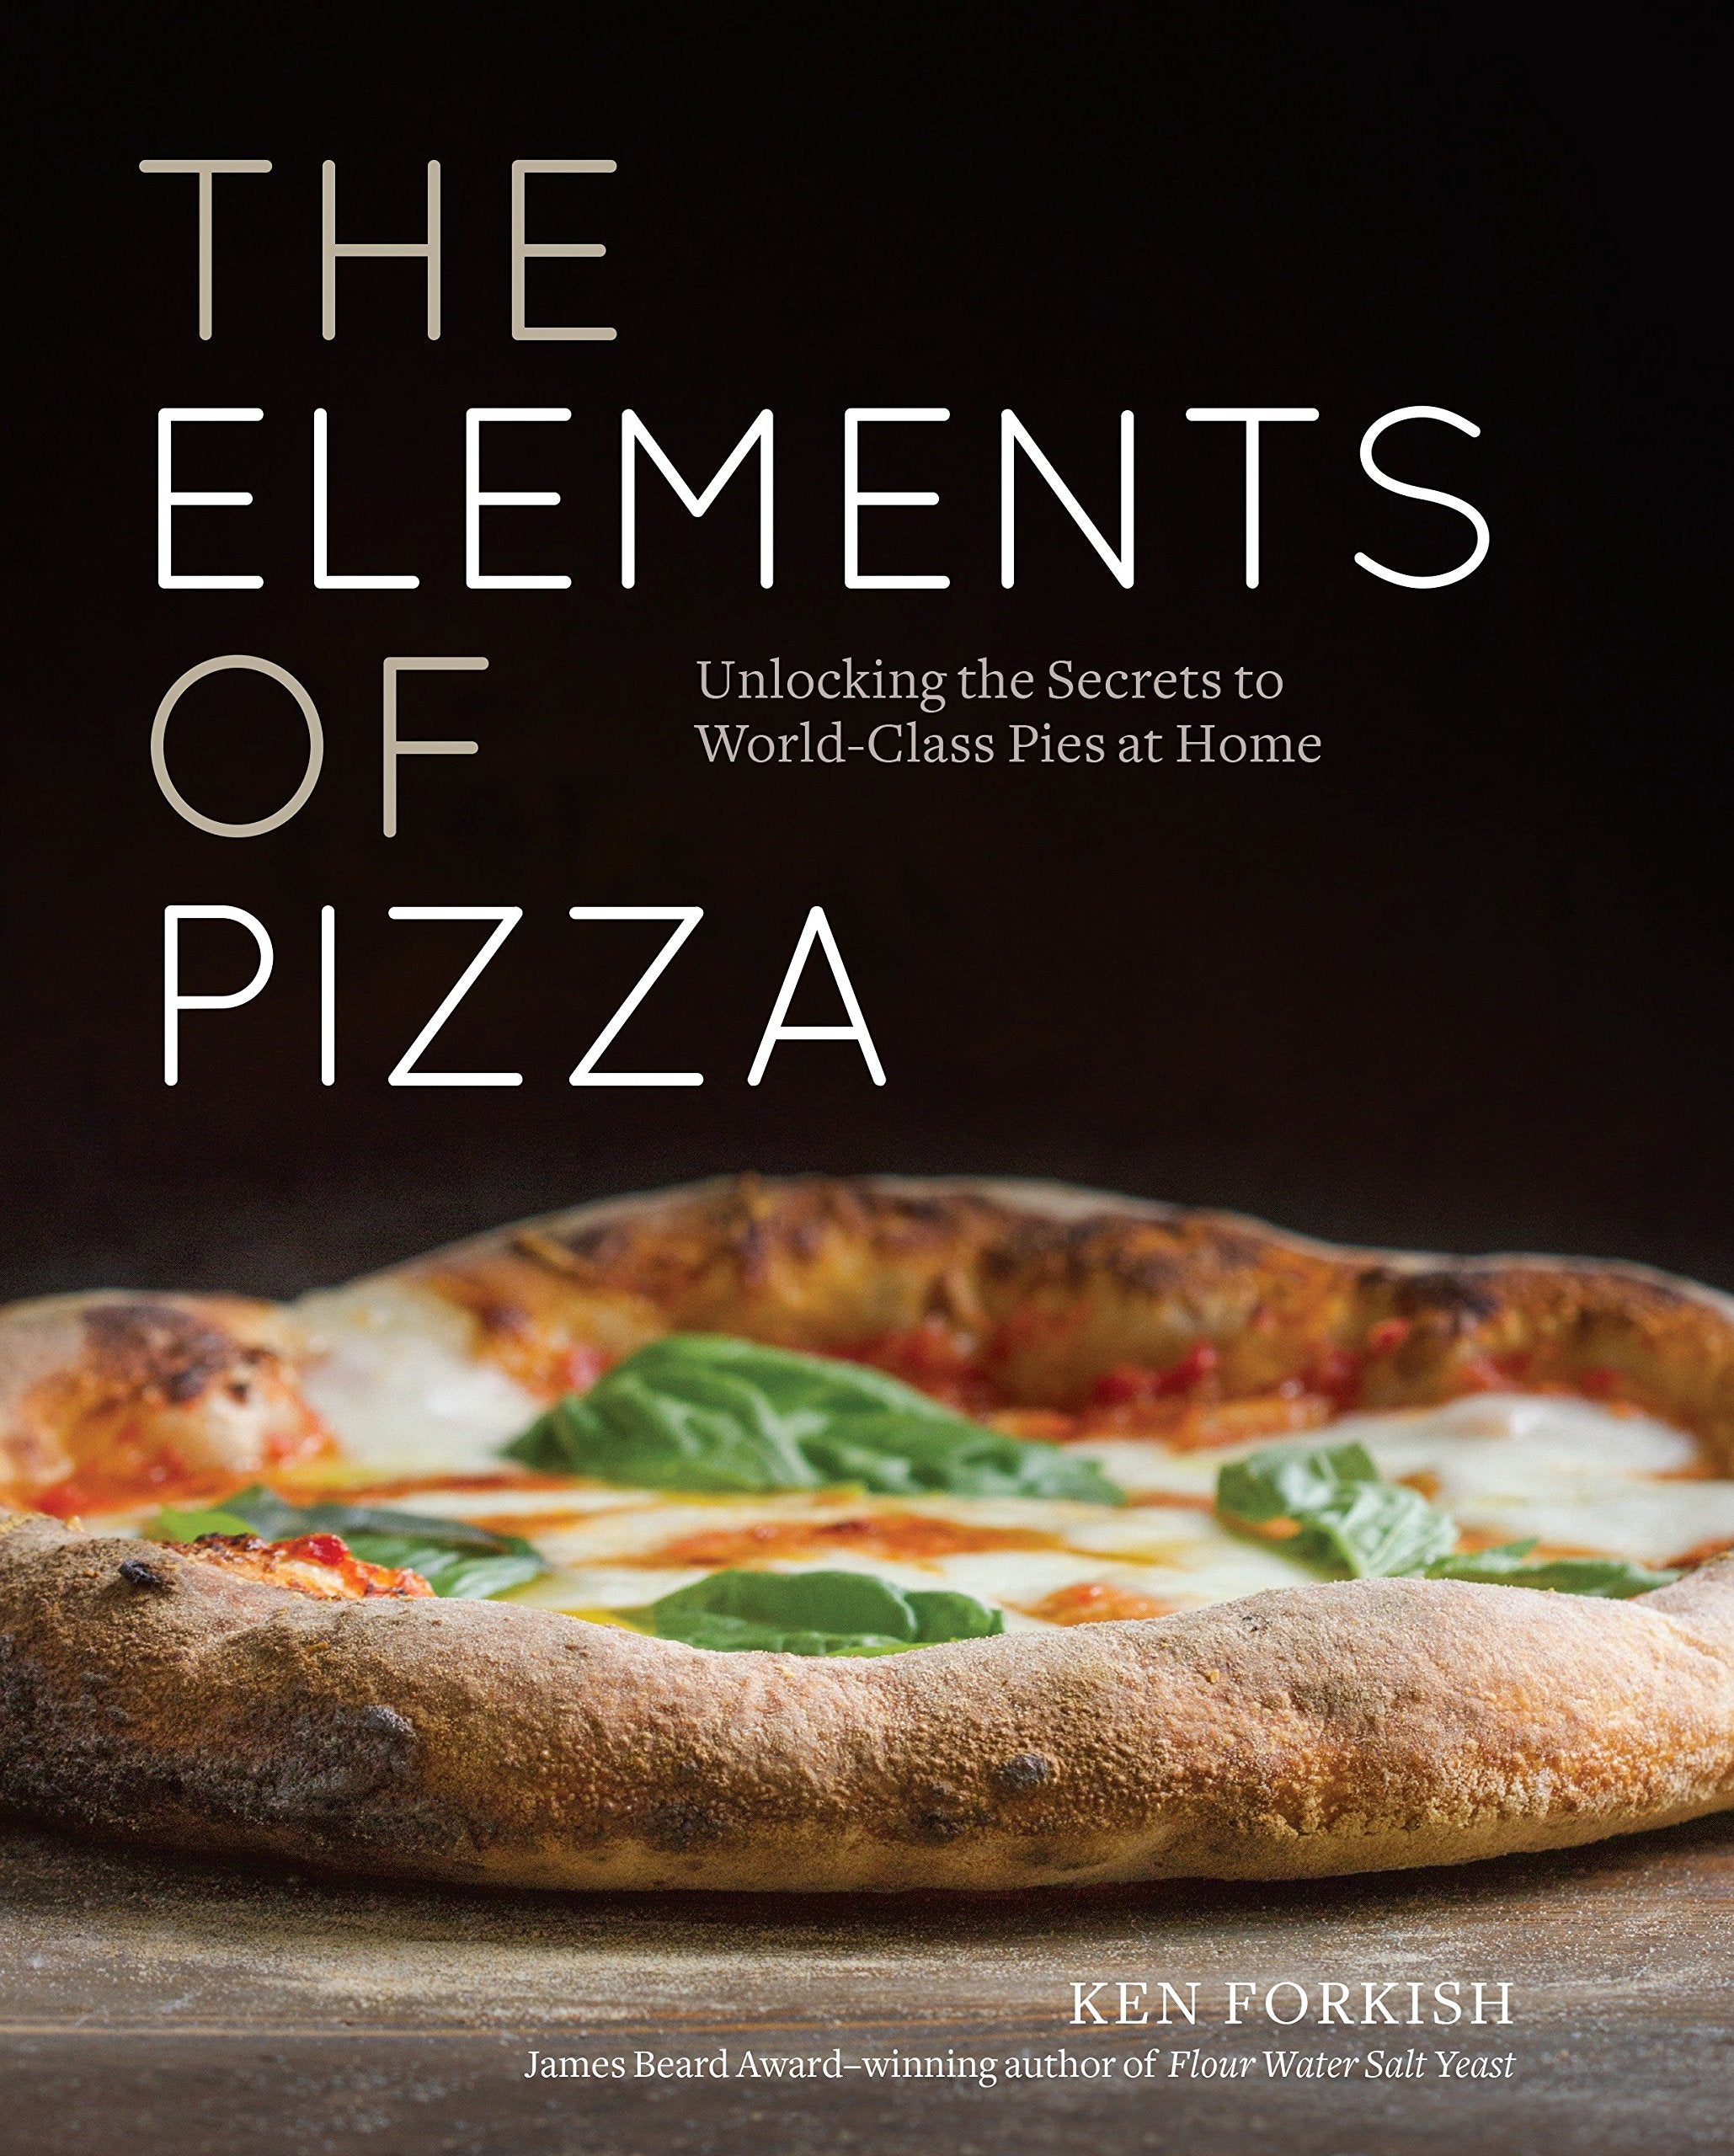 The Elements of Pizza: Unlocking the Secrets to World-Class Pies at Home (Ken Forkish) *Signed*